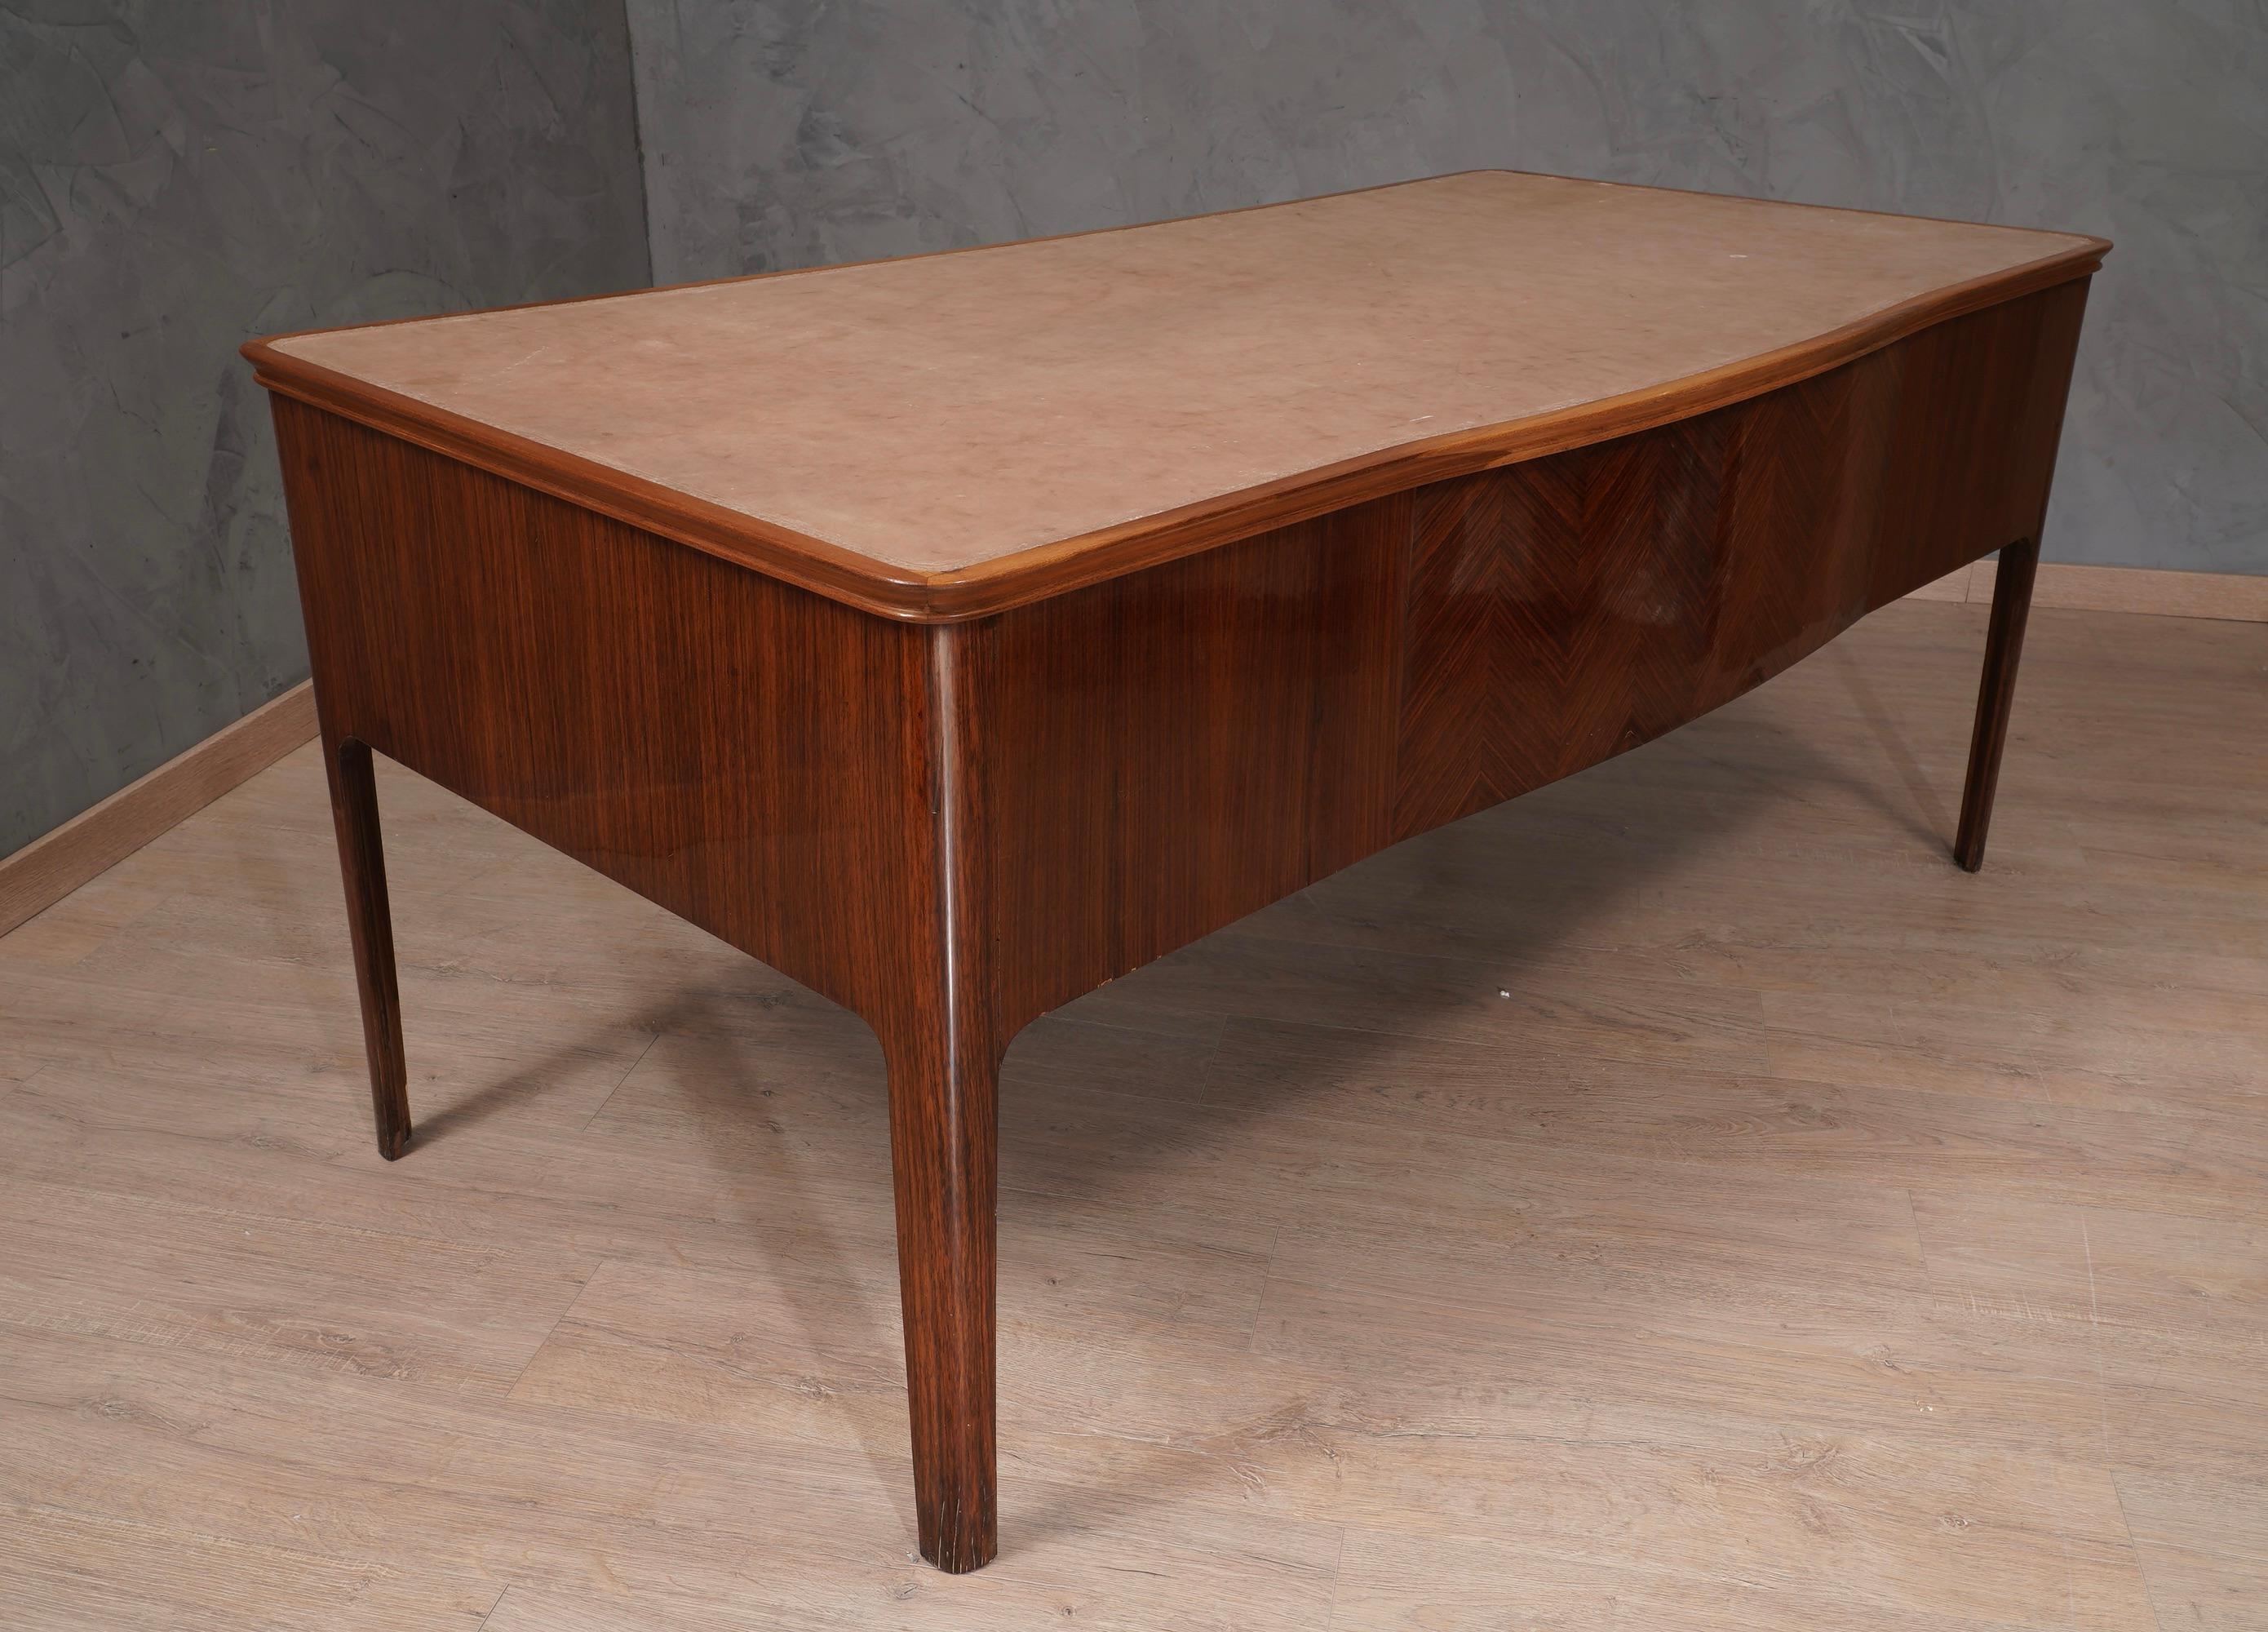 Midcentury Walnut and Leather Italian Writing Desk, 1950 For Sale 3